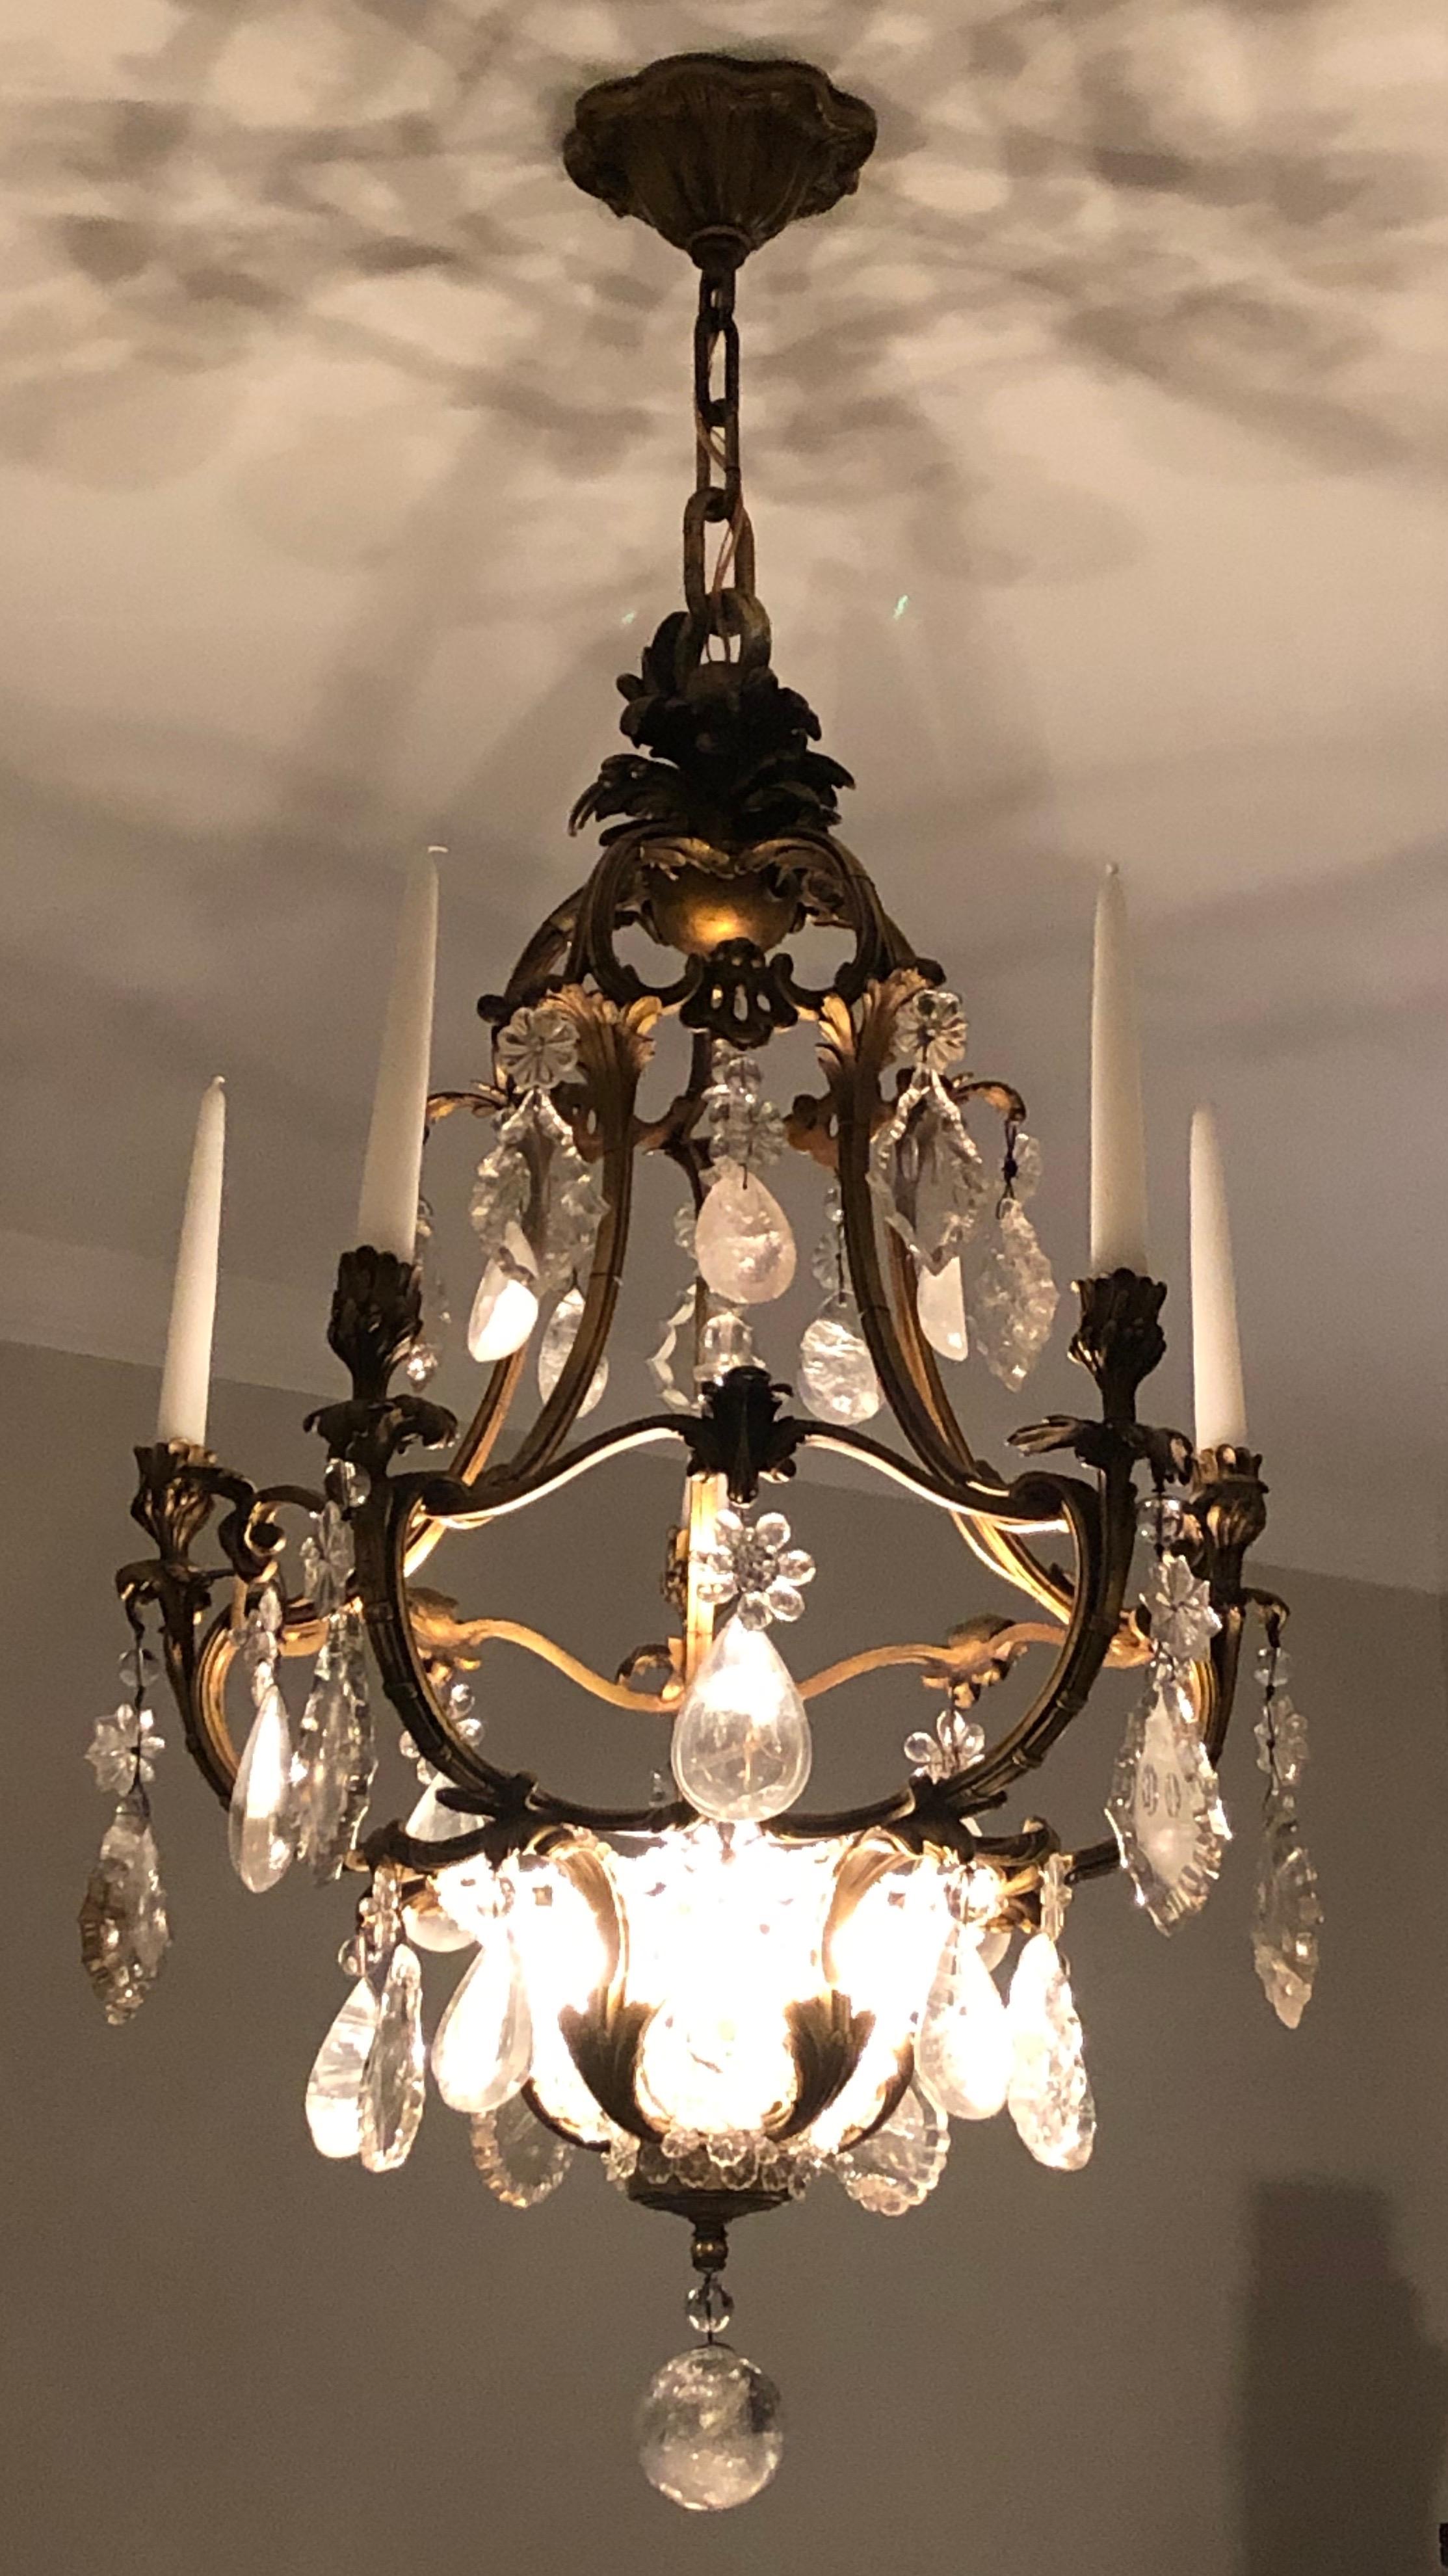 This chandelier was probably made by the Paris bronzier Baguès, circa 1900. The botanical forms of the cage, and the shapes of the rock-crystal prisms, recall the Rococo style of the 18th century.  But the sinuous cast-bronze curves channel the Art